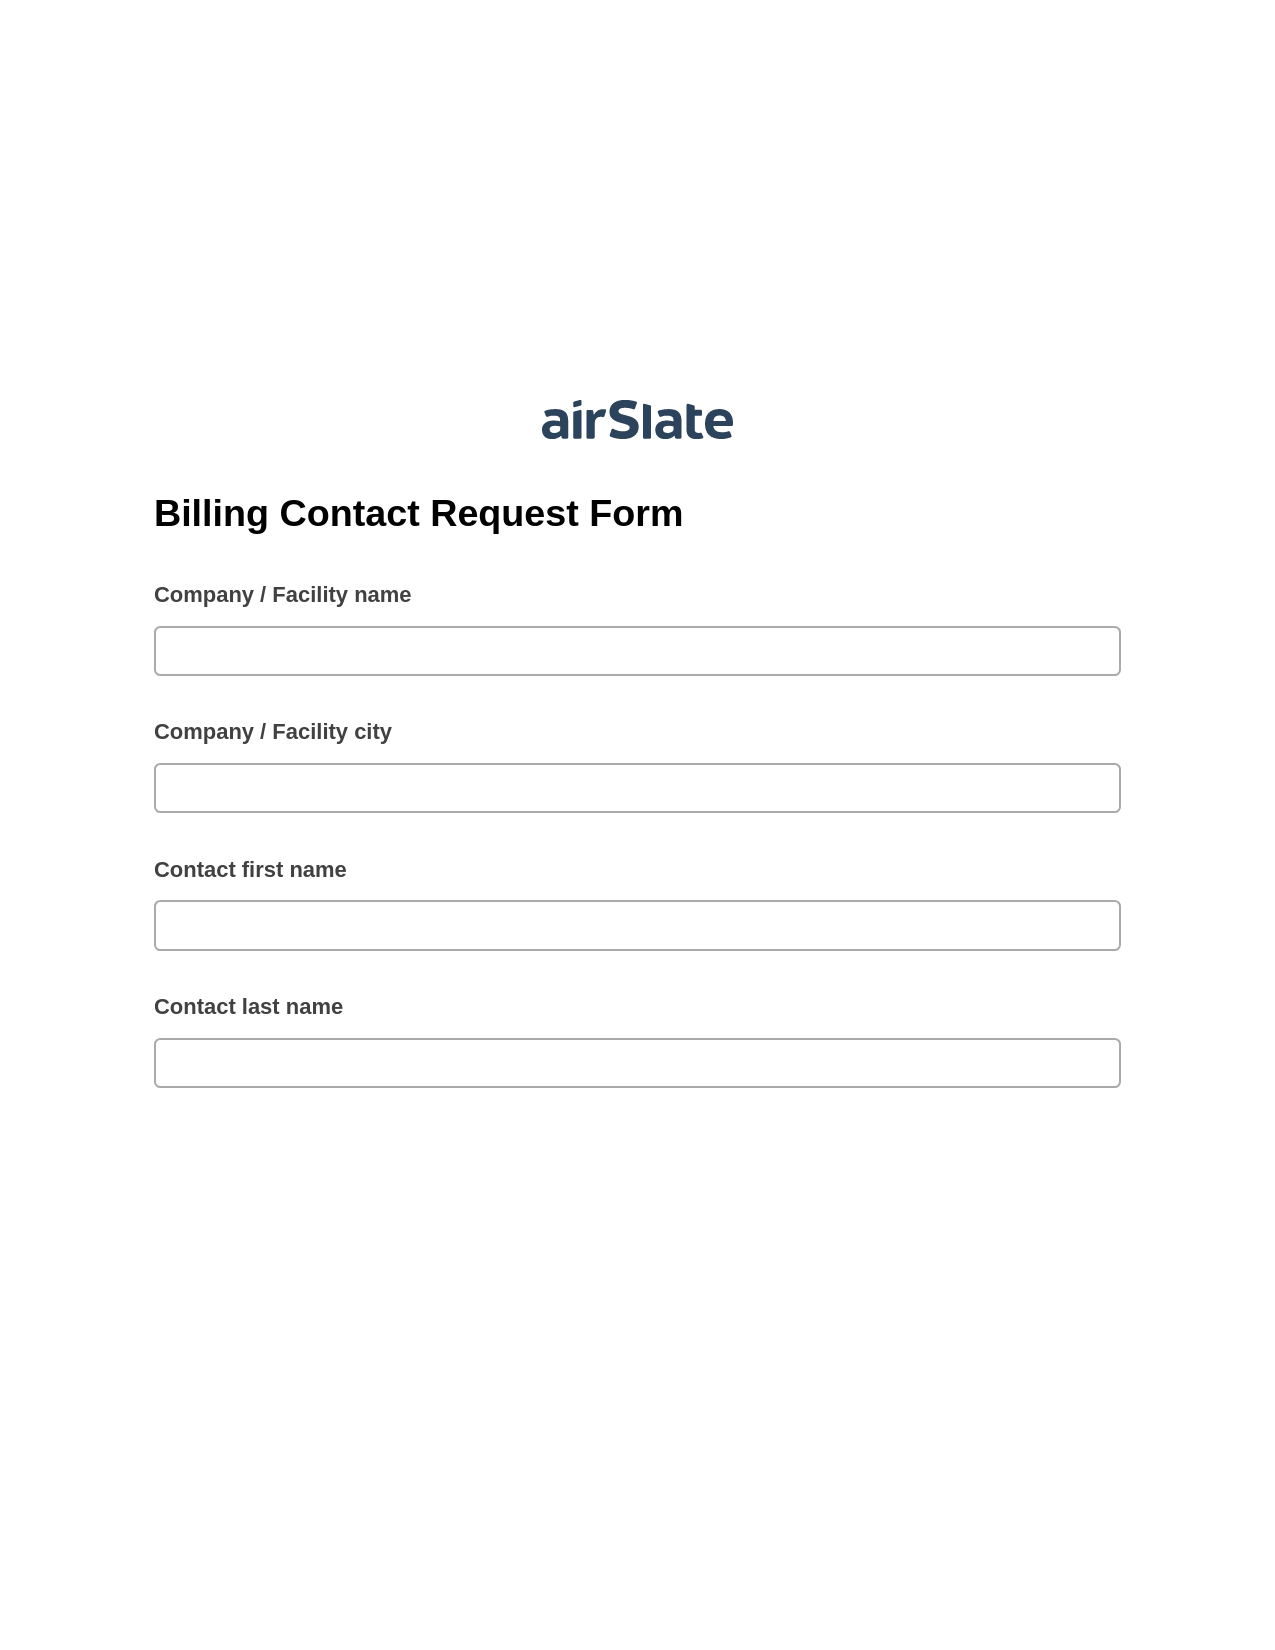 Billing Contact Request Form Pre-fill from Salesforce Record Bot, Webhook Bot, Archive to SharePoint Folder Bot